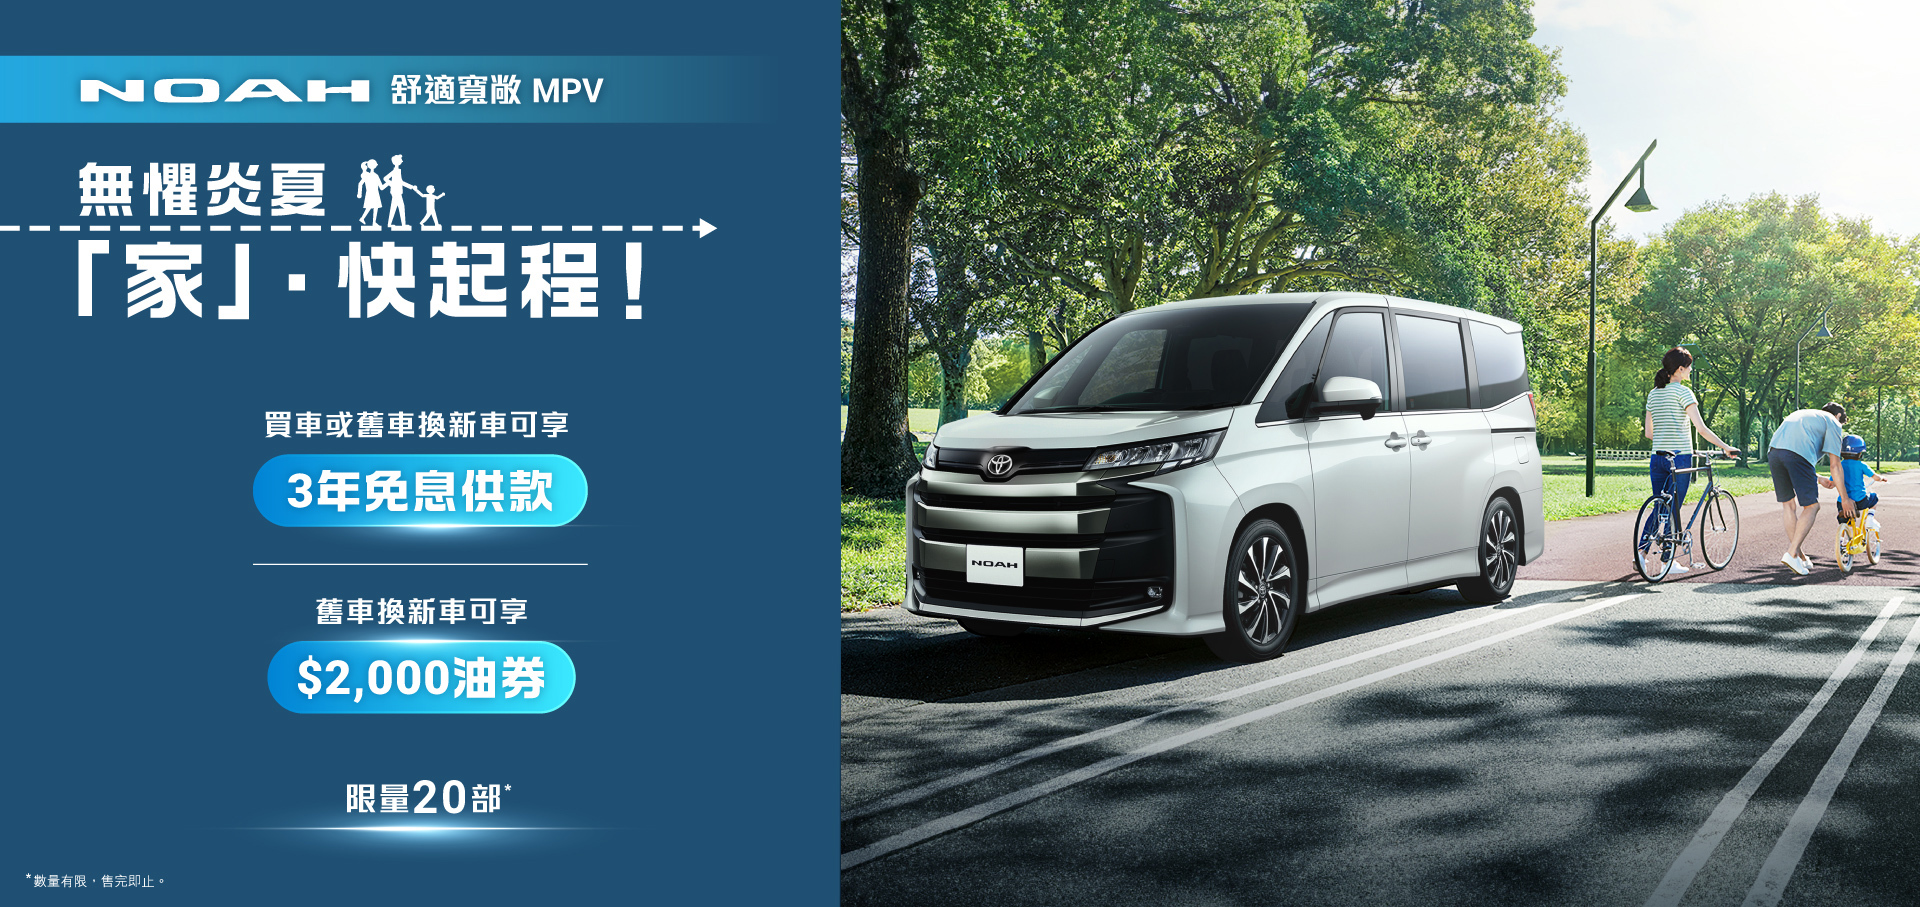 MPV NOAH • Kick Off Your Family Journey🔹3️⃣ Years of Interest-Free Financing. Only 20 Units Available